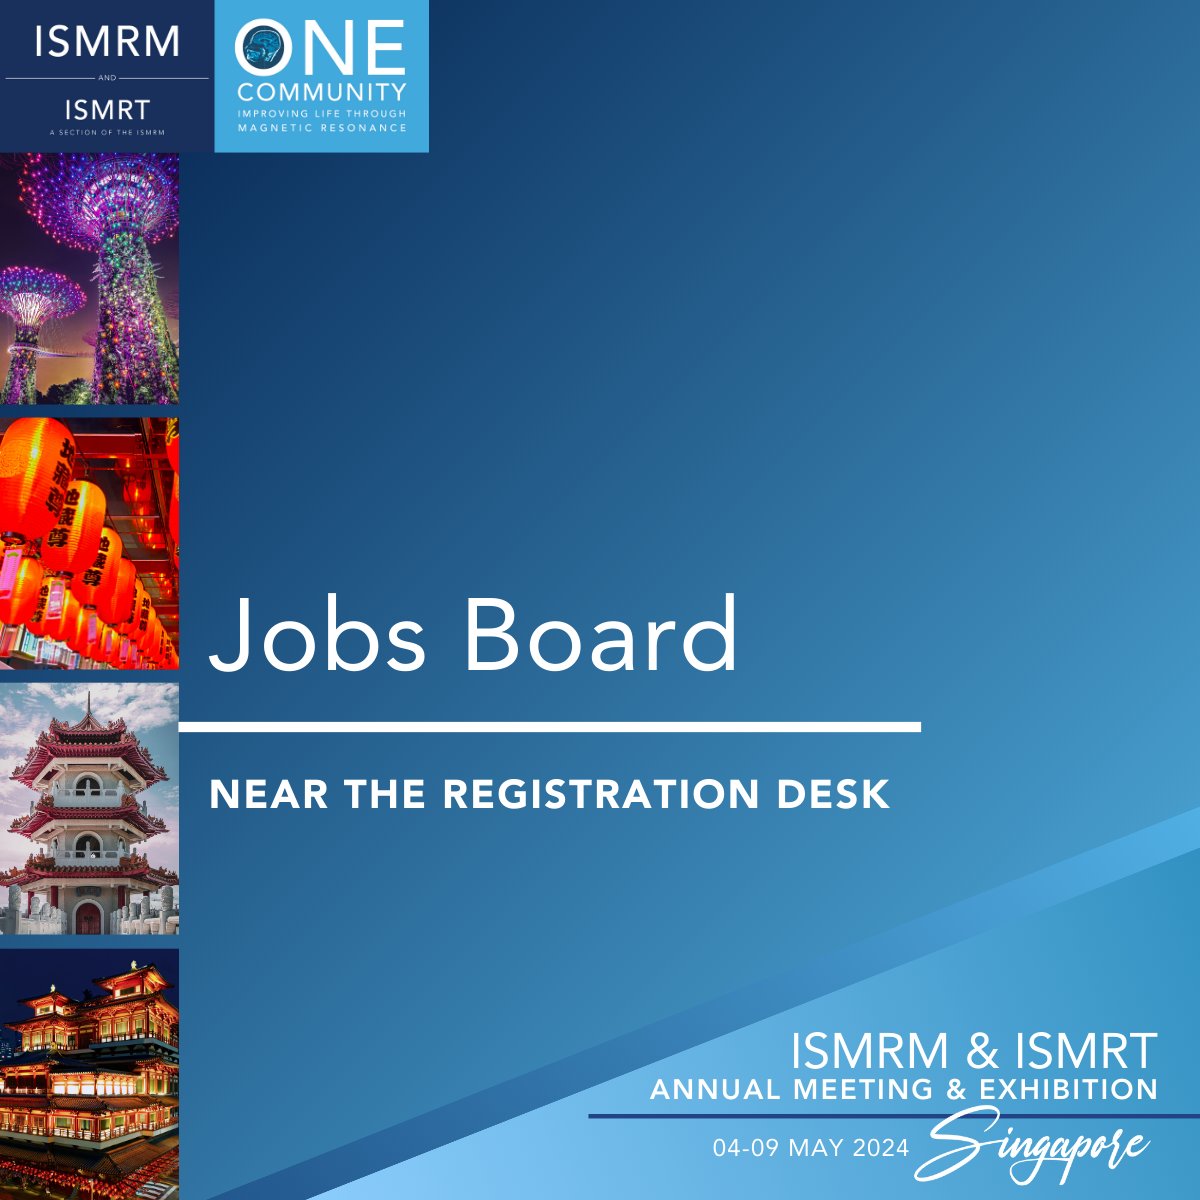 Don’t forget to view (or post!) on the Jobs Board near the Registration Desk! #ISMRM2024 #ISMRT2024 #ISMRM #ISMRT #MRI #MR #MagneticResonance #Singapore